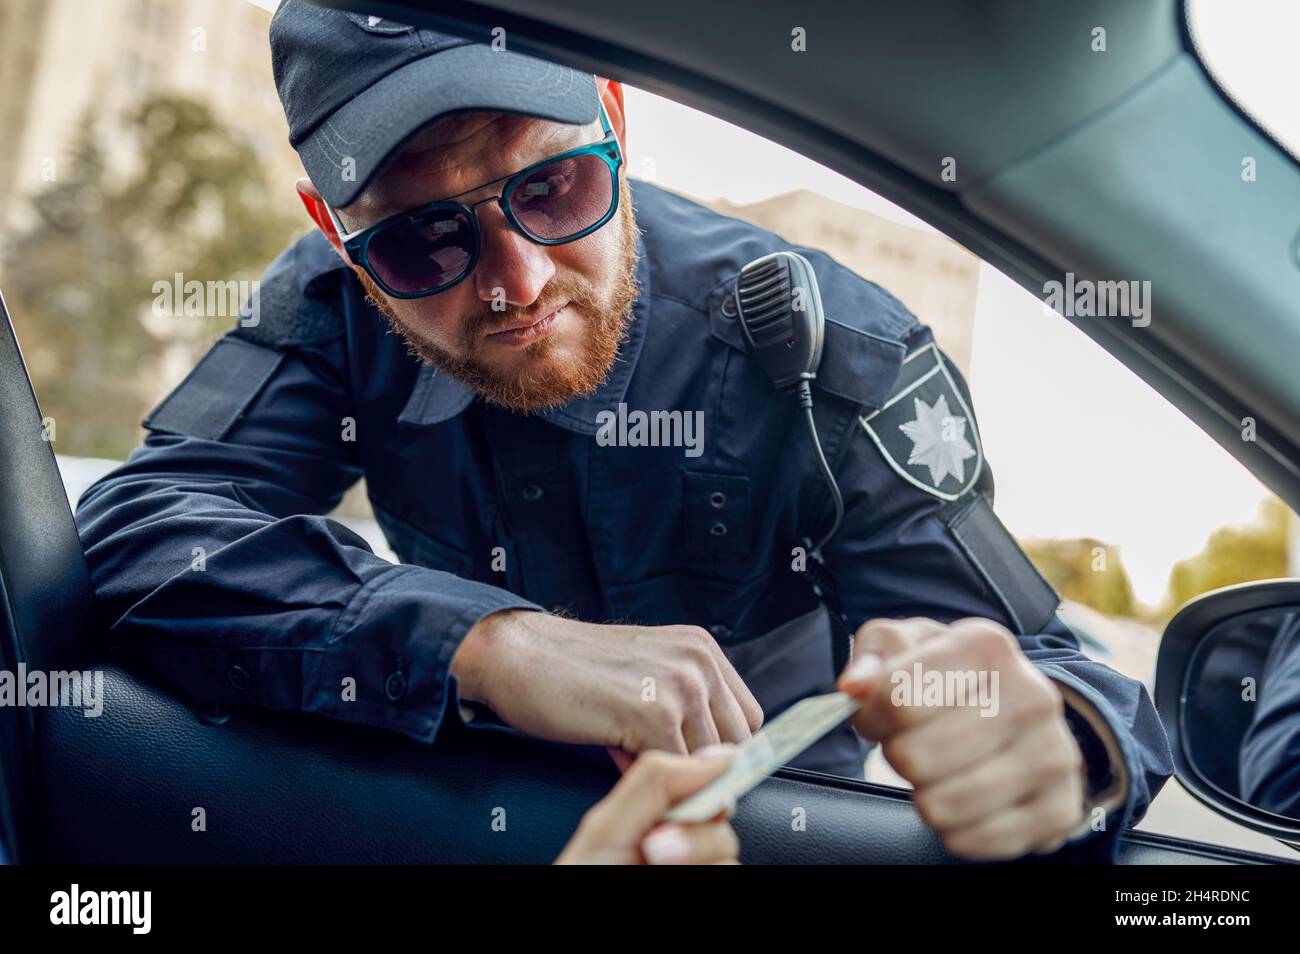 Police officer takes driver's license from driver Stock Photo